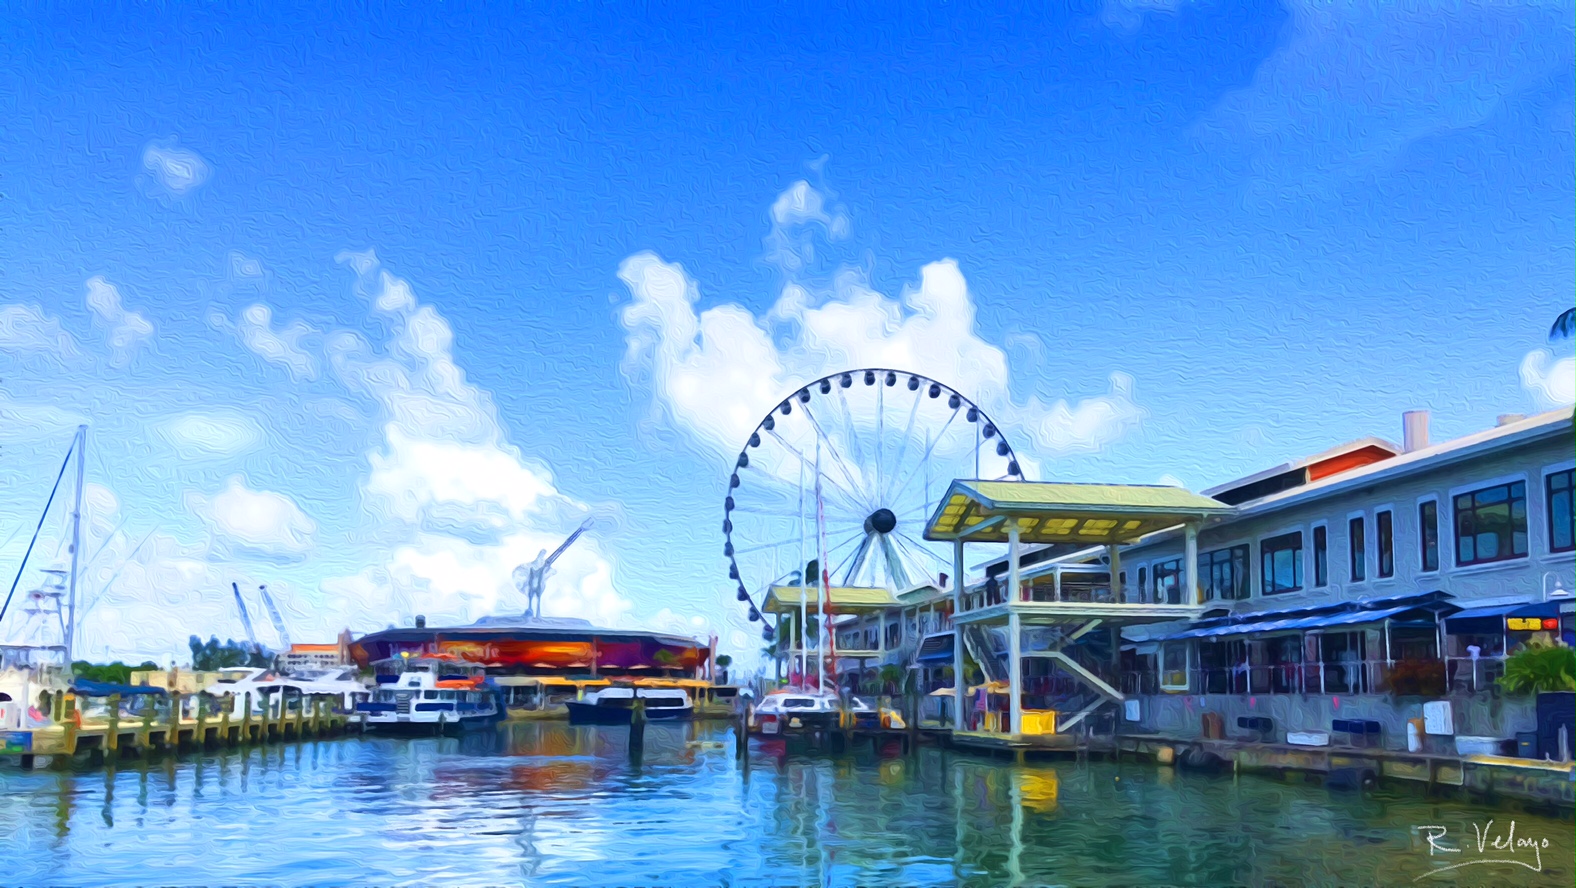 "PIER 5 AT MIAMI’S BAYSIDE MARKETPLACE" [Created: 7/23/2021]